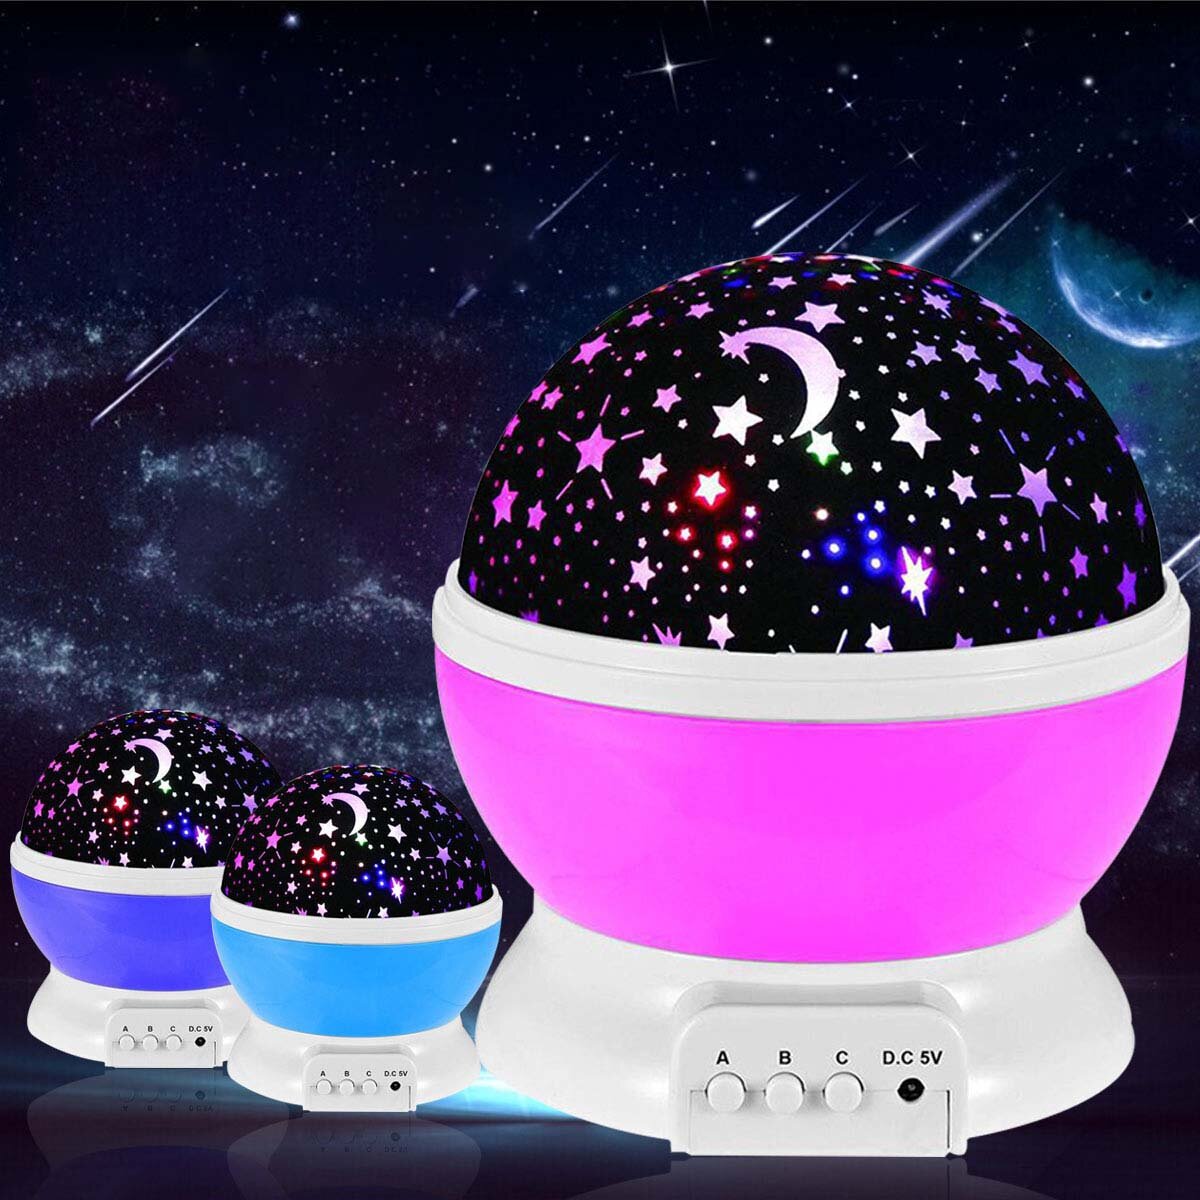 LED Starry Projector Lamp Baby Night Light USB Romantic Rotating Moon Cosmos Sky Star Projection Lamp For Kids Baby Bedr